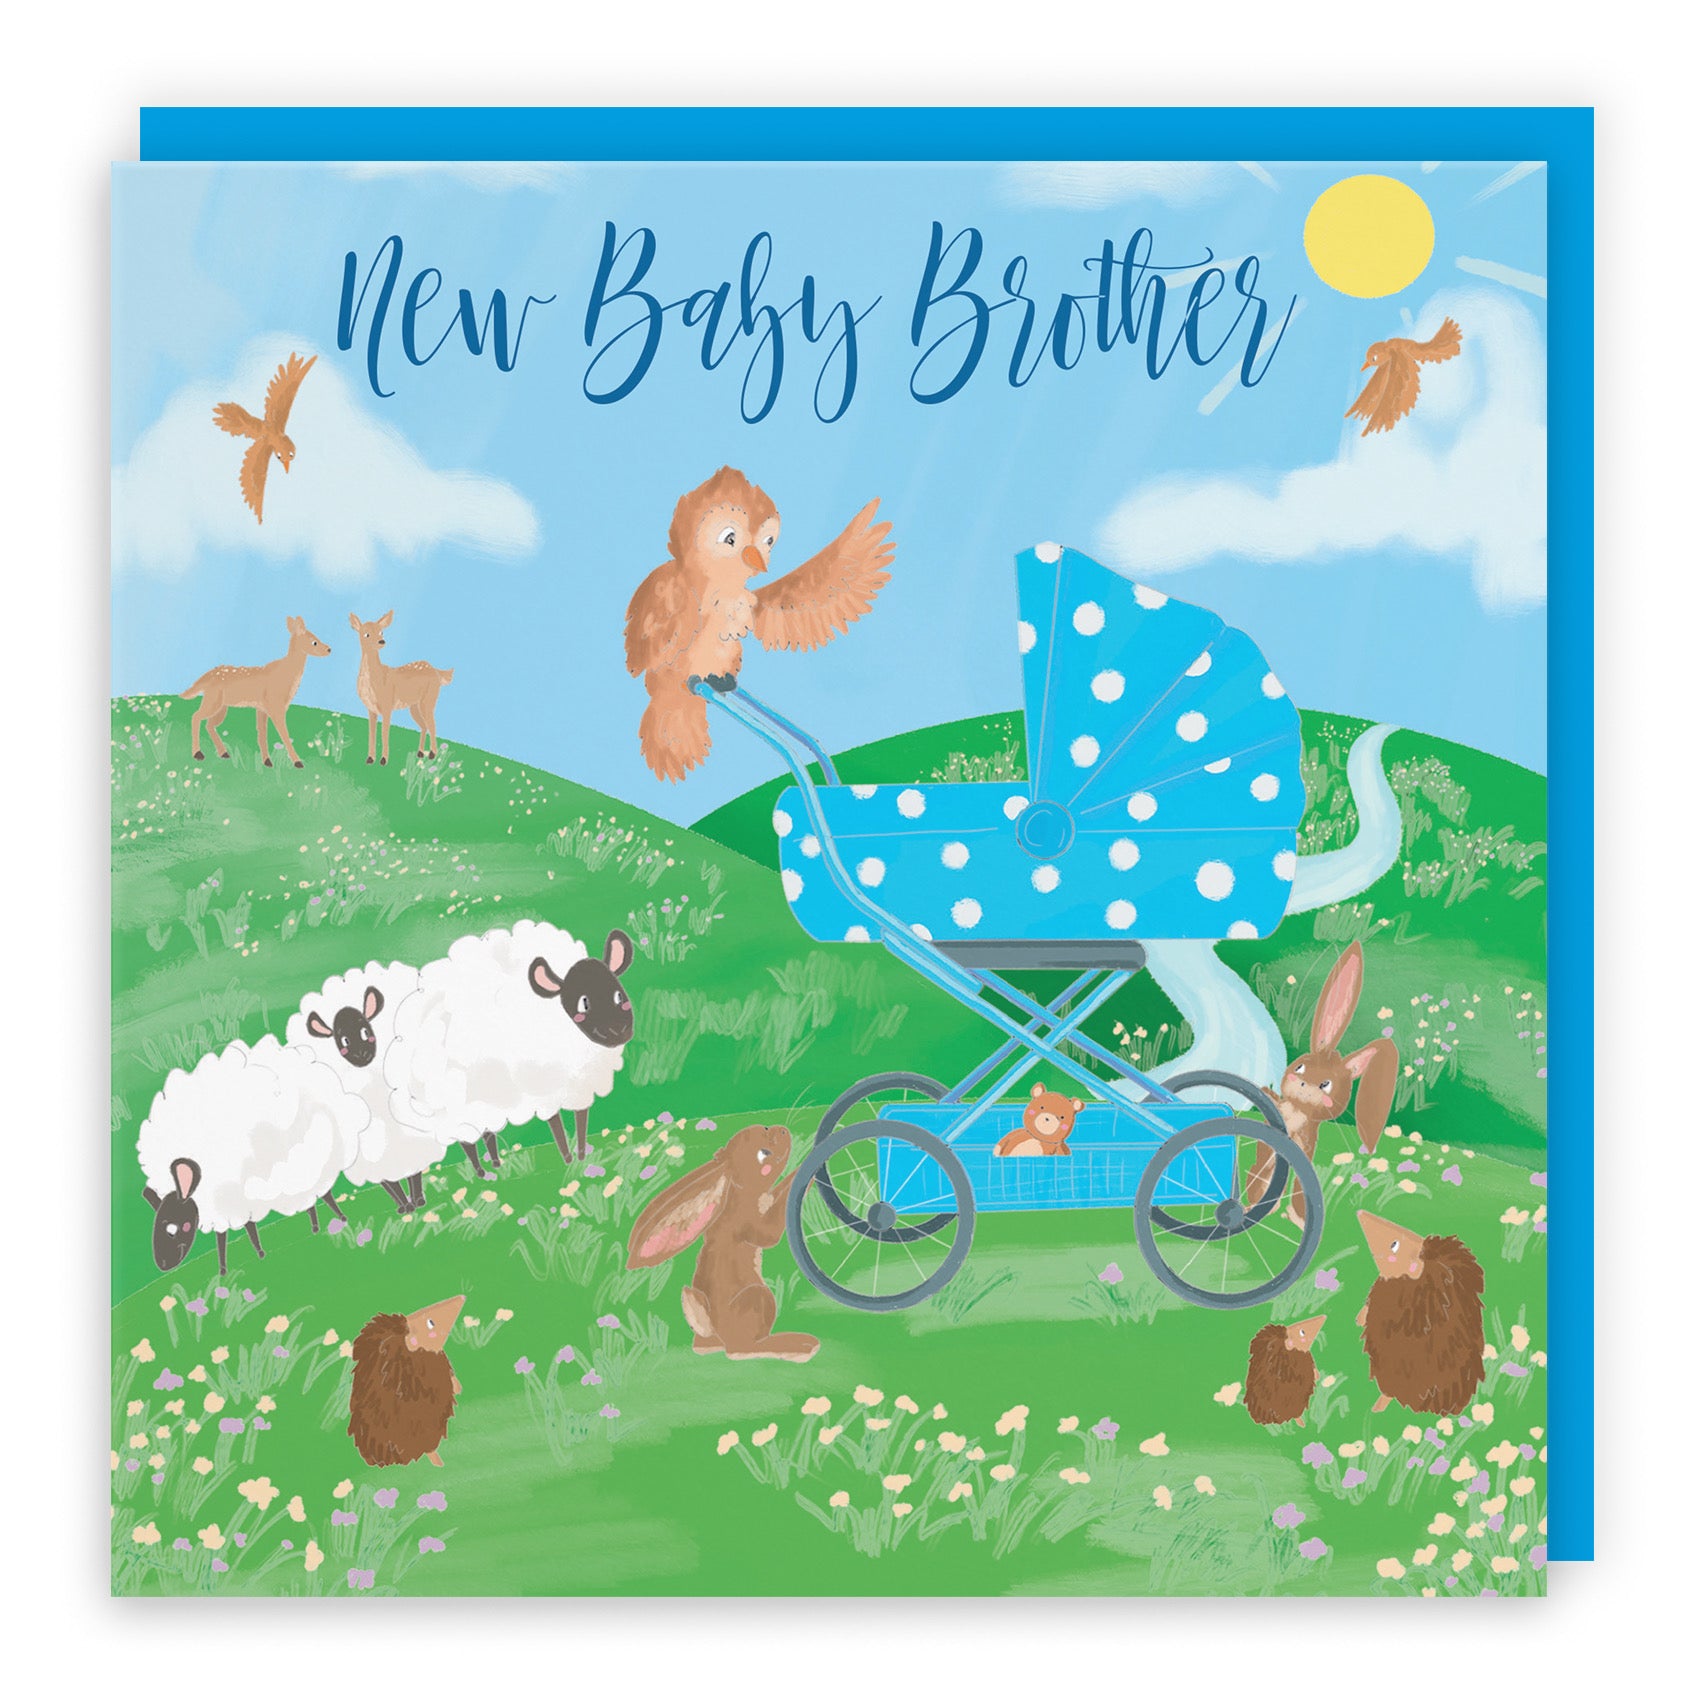 New Baby Brother Congratulations Card Countryside - Default Title (B09VM5TSVW)